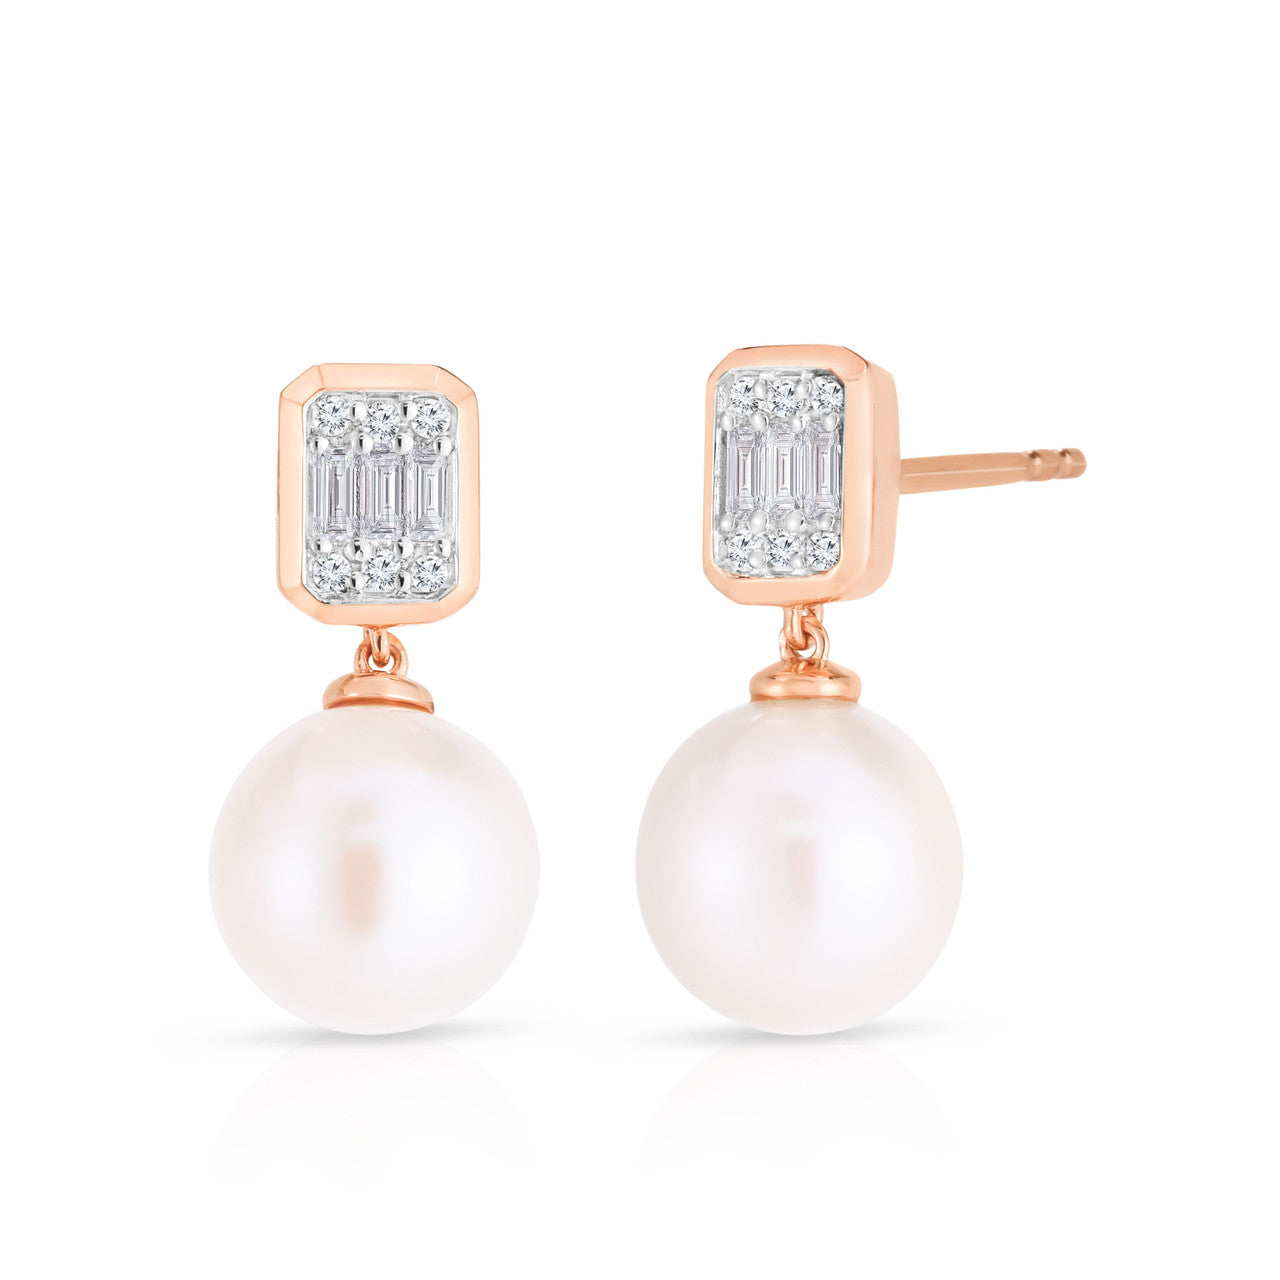 Emerald Illusion Diamond and Pearl Drop Earrings in Rose Gold